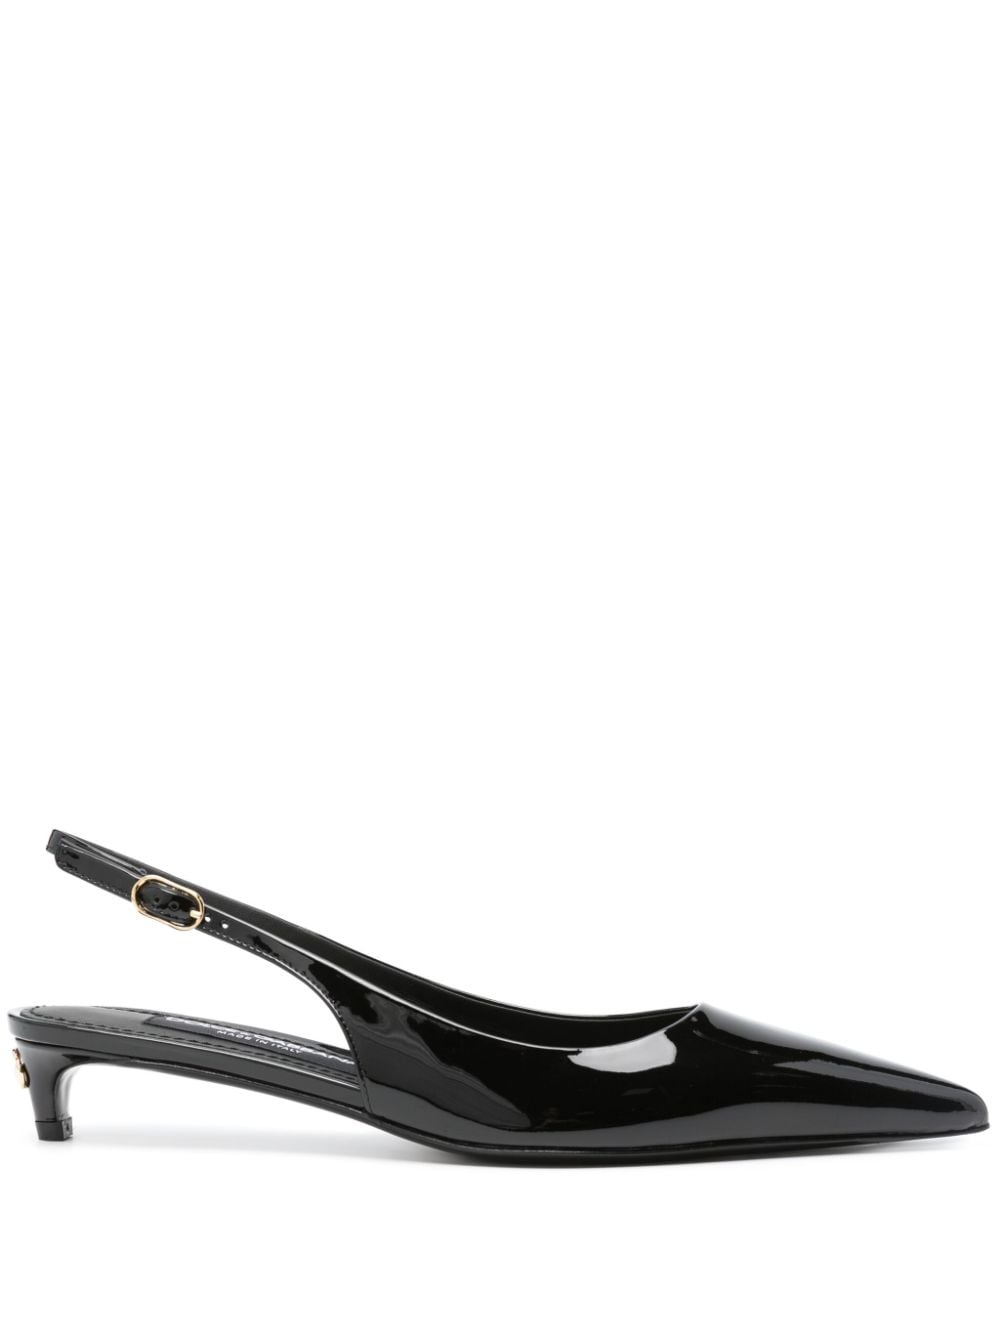 Dolce & Gabbana Patent-leather Slingback Pumps In Black